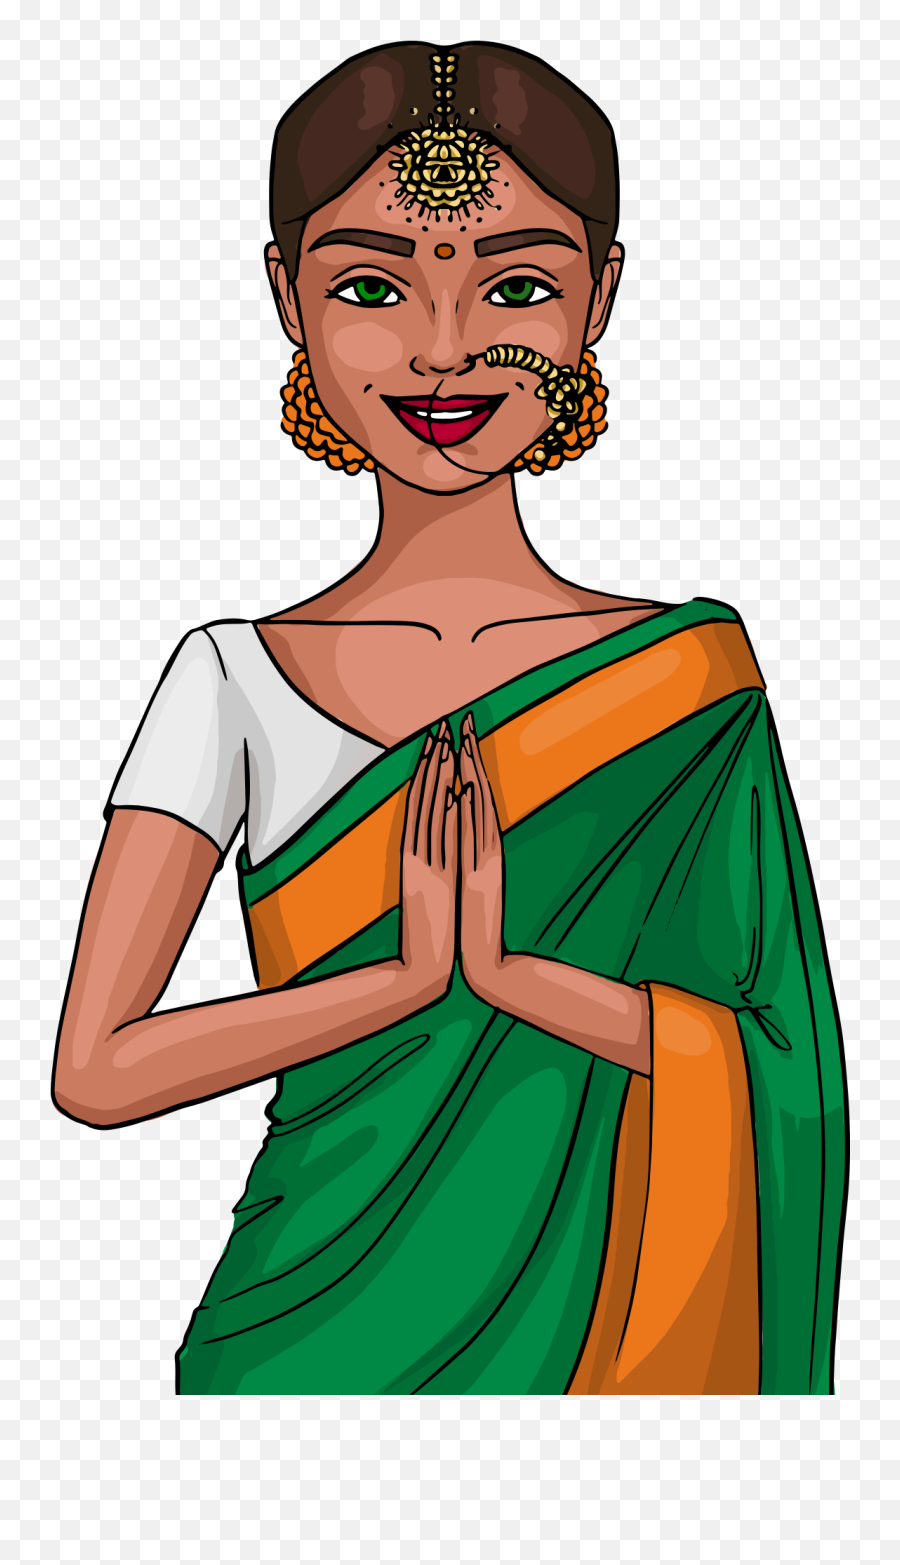 Indian Girl Png Image Free Download Searchpngcom - Indian Freedom Fighters Gif,Indian Png